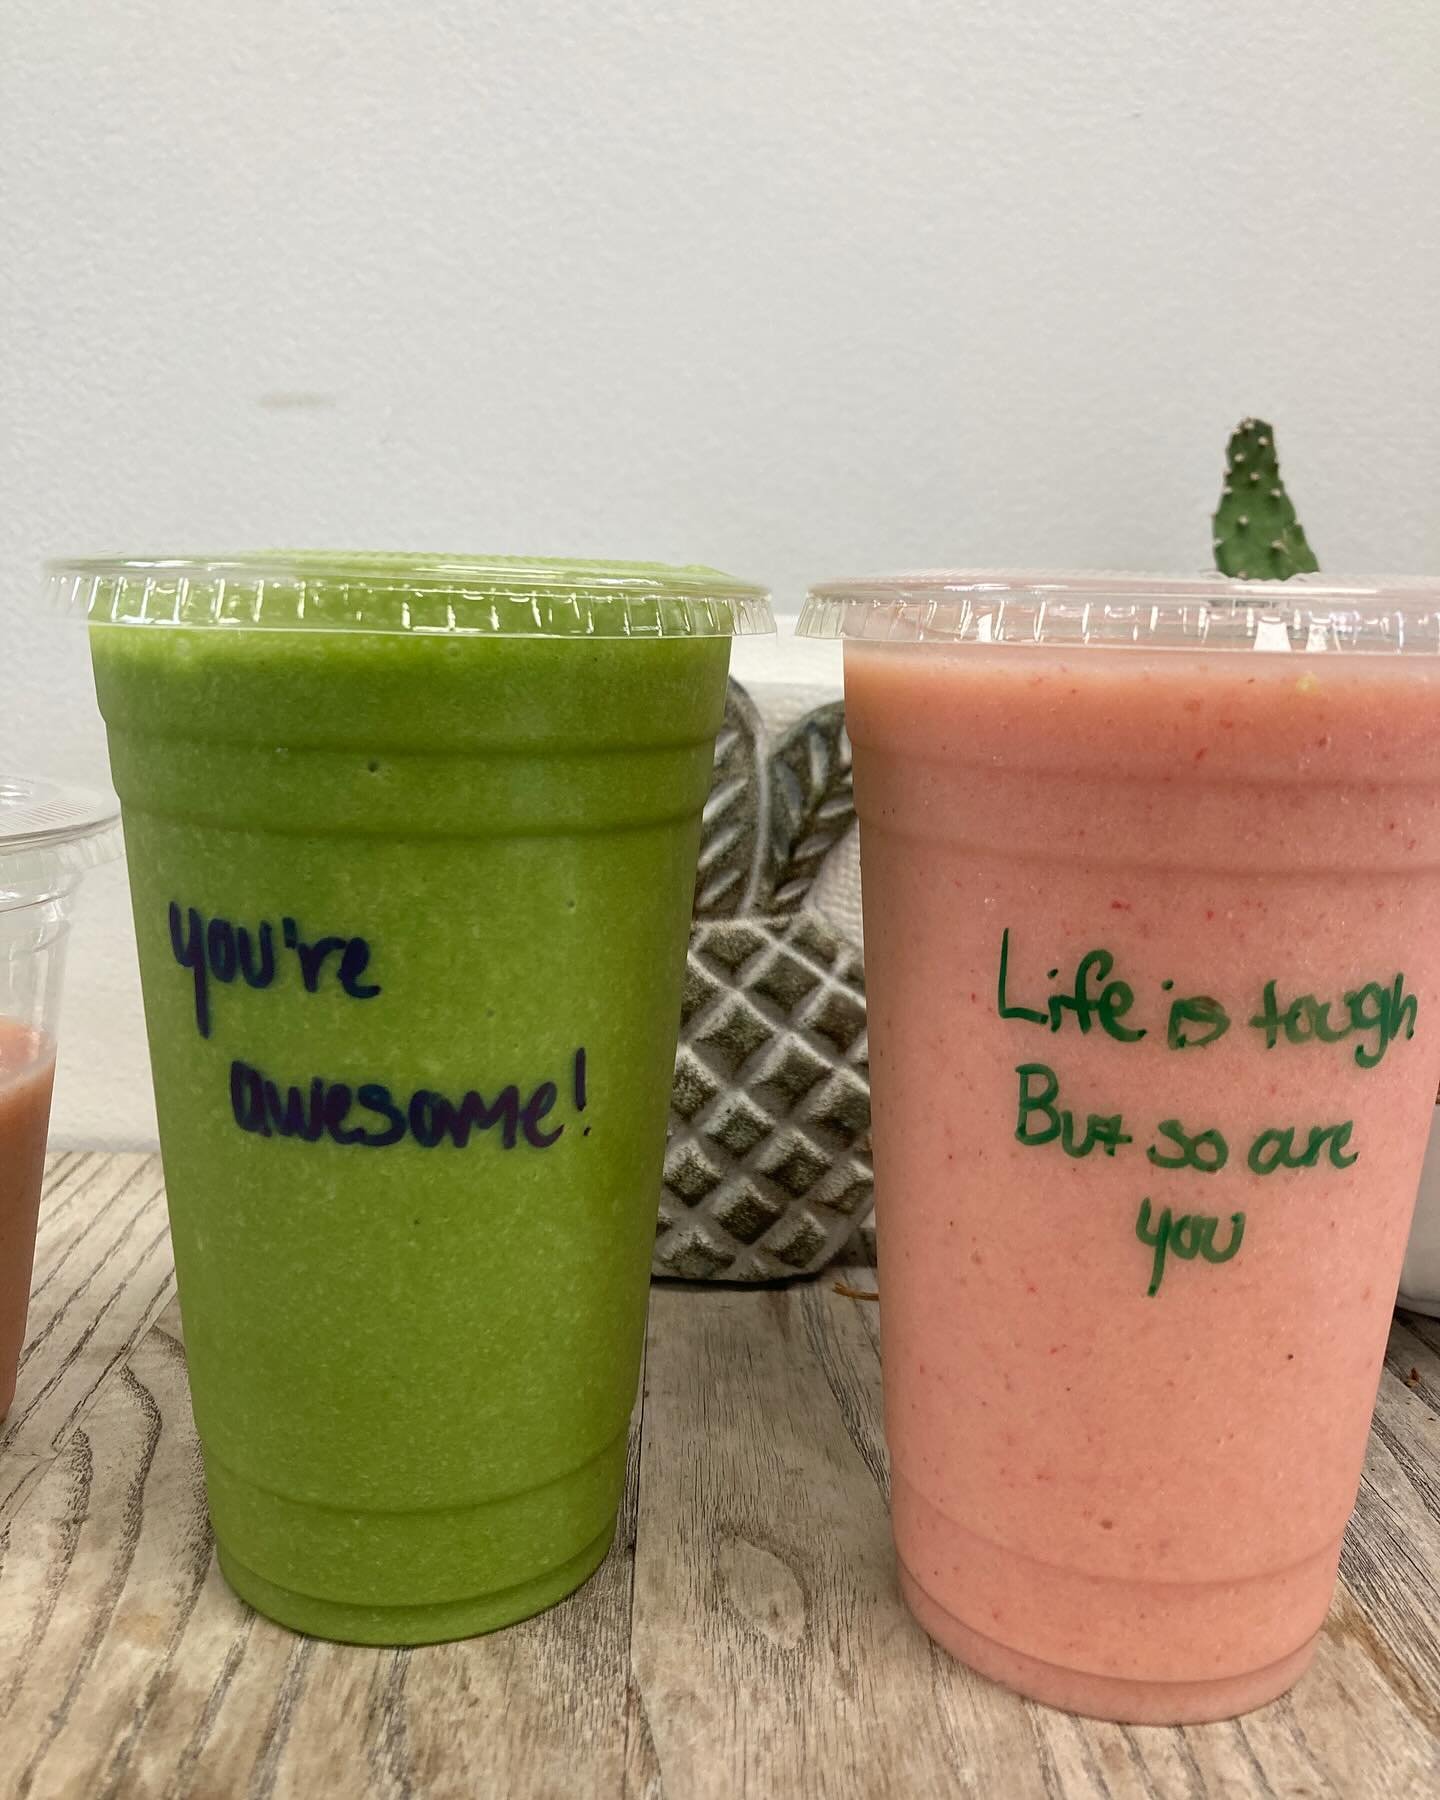 Fruit or veggie smoothie? 

No matter what you want in your smoothie, we&rsquo;ve got you covered! 

Come on in and try our delicious, health, refreshing menu! 

Open 7-7

#familyfriendly #breakfast #brunch #lunch #snacktime #ontherunsnack #onthegofu